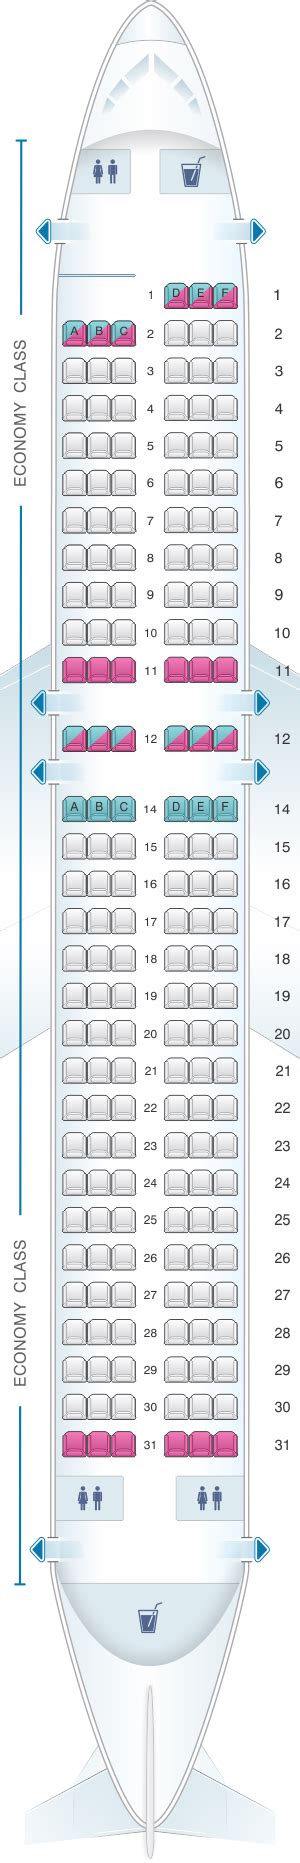 2 days ago · Our Economy class seats on all Airbus aircraft have a pitch range of 31–32 inches and a width of 17–18 inches. Aer Lingus Regional routes operated by Emerald Airlines using ATR aircraft have a seat pitch range of 29–31 inches..